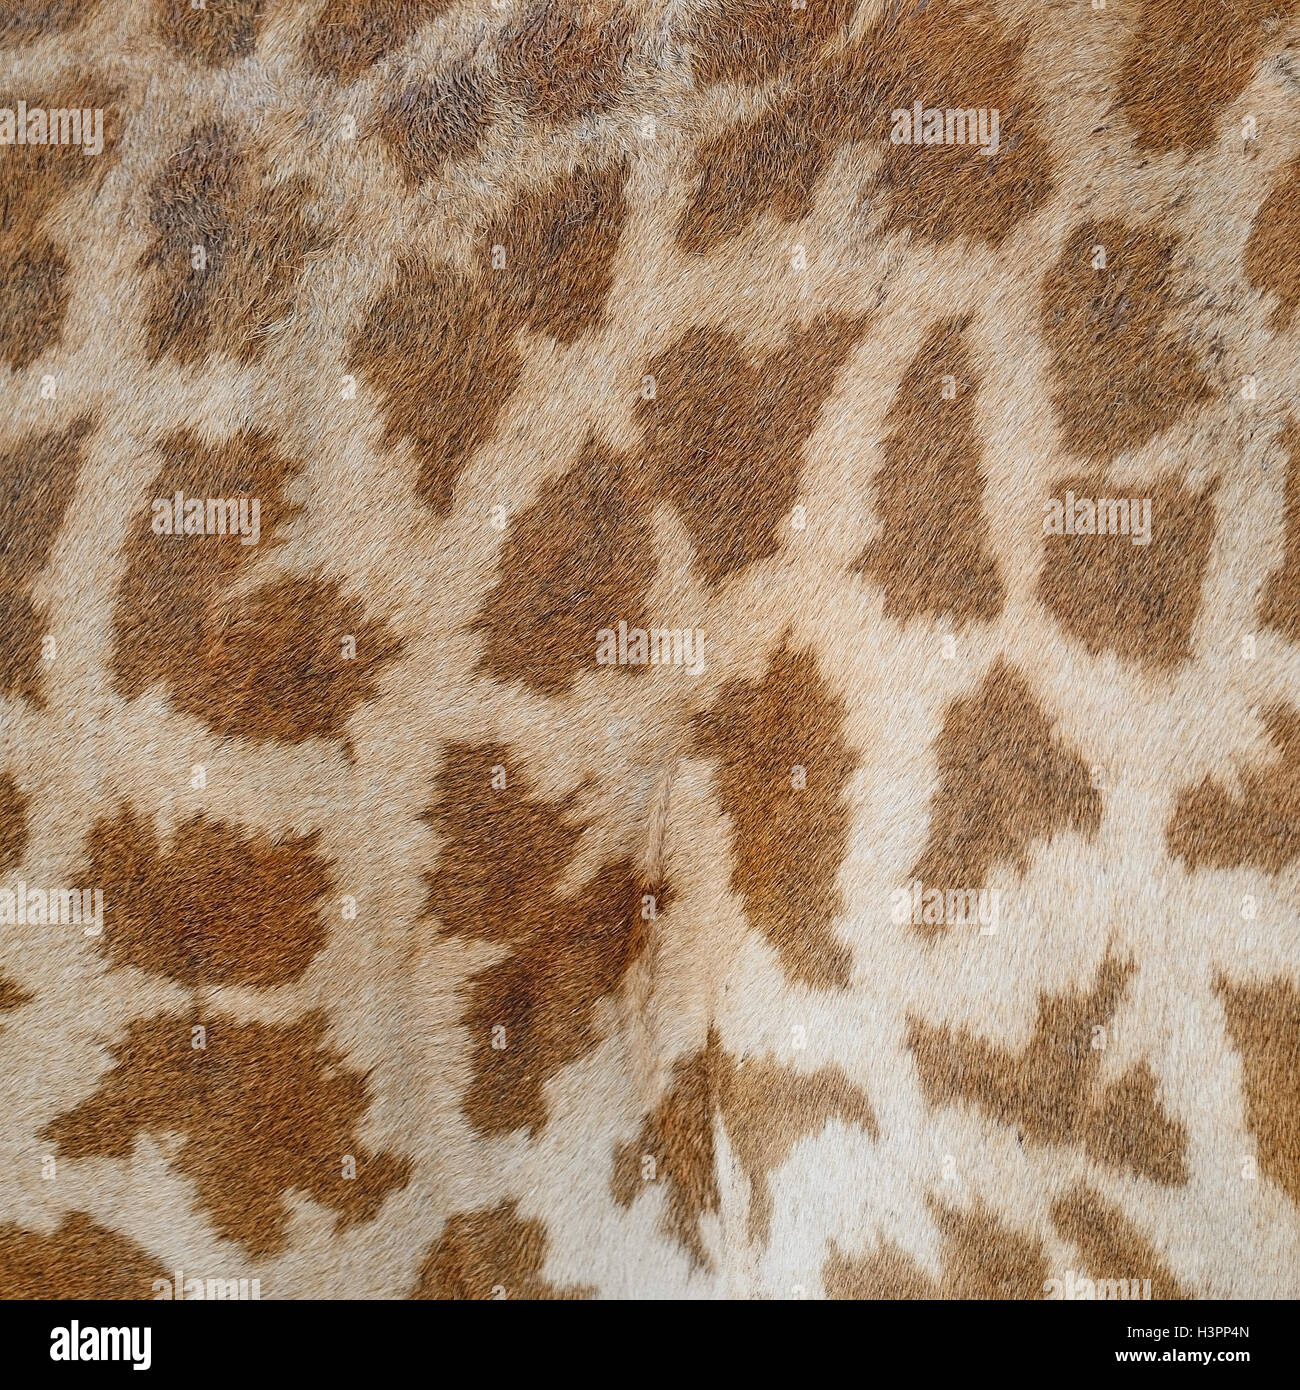 AFRICA TRIBAL GIRAFFE SKIN PATTERN POSTER PICTURE PRINT Sizes A5 to A0 **NEW**